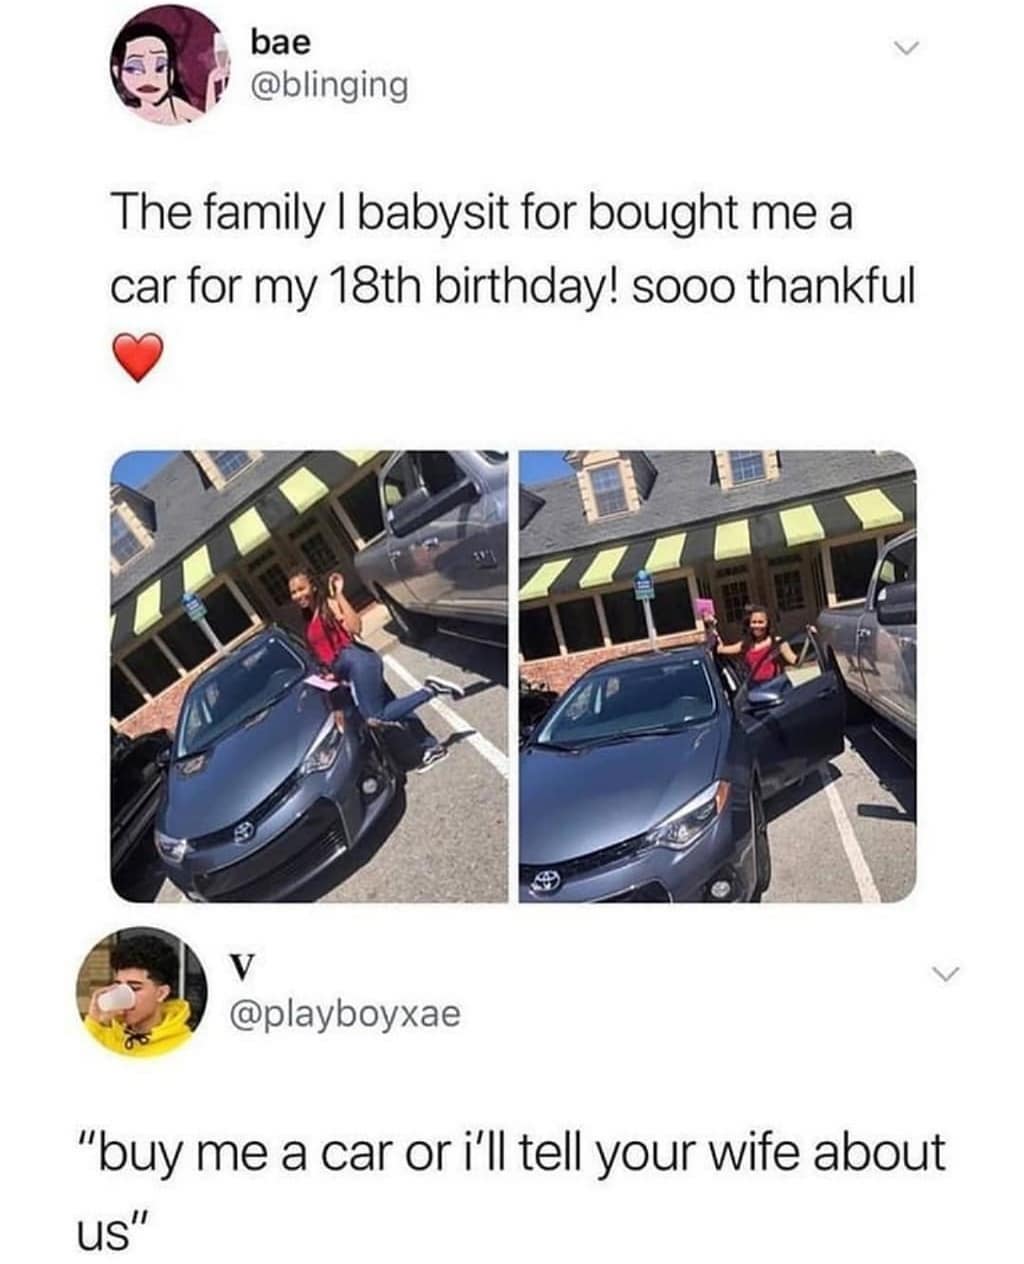 @blinging bae - bae The family I babysit for bought me a car for my 18th birthday! sooo thankful V "buy me a car or i'll tell your wife about us"